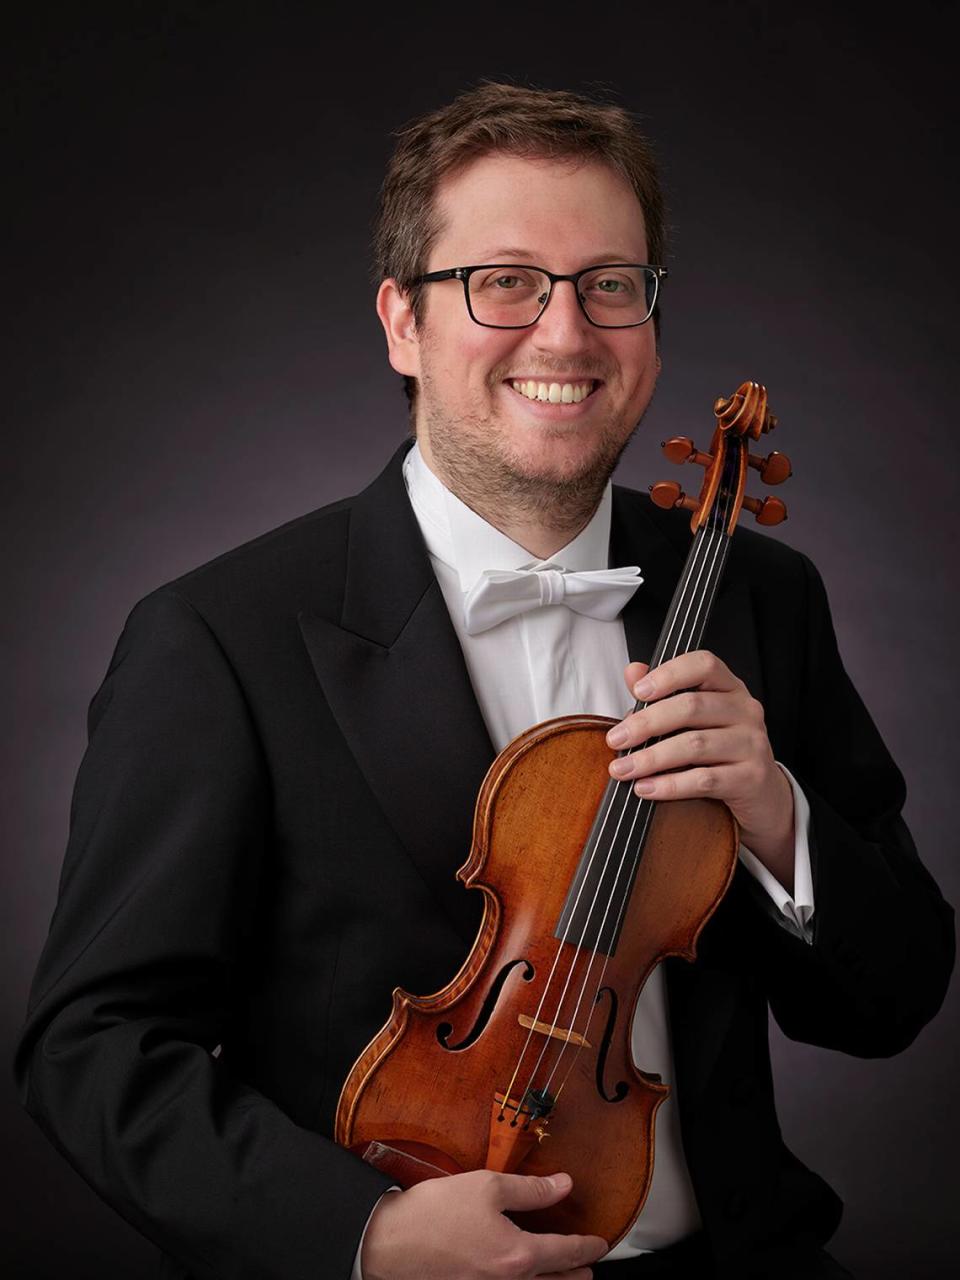 Violinist David Radzynski, concertmaster of the Cleveland Orchestra, will return for a recital March 14. Courtesy of Park ICM